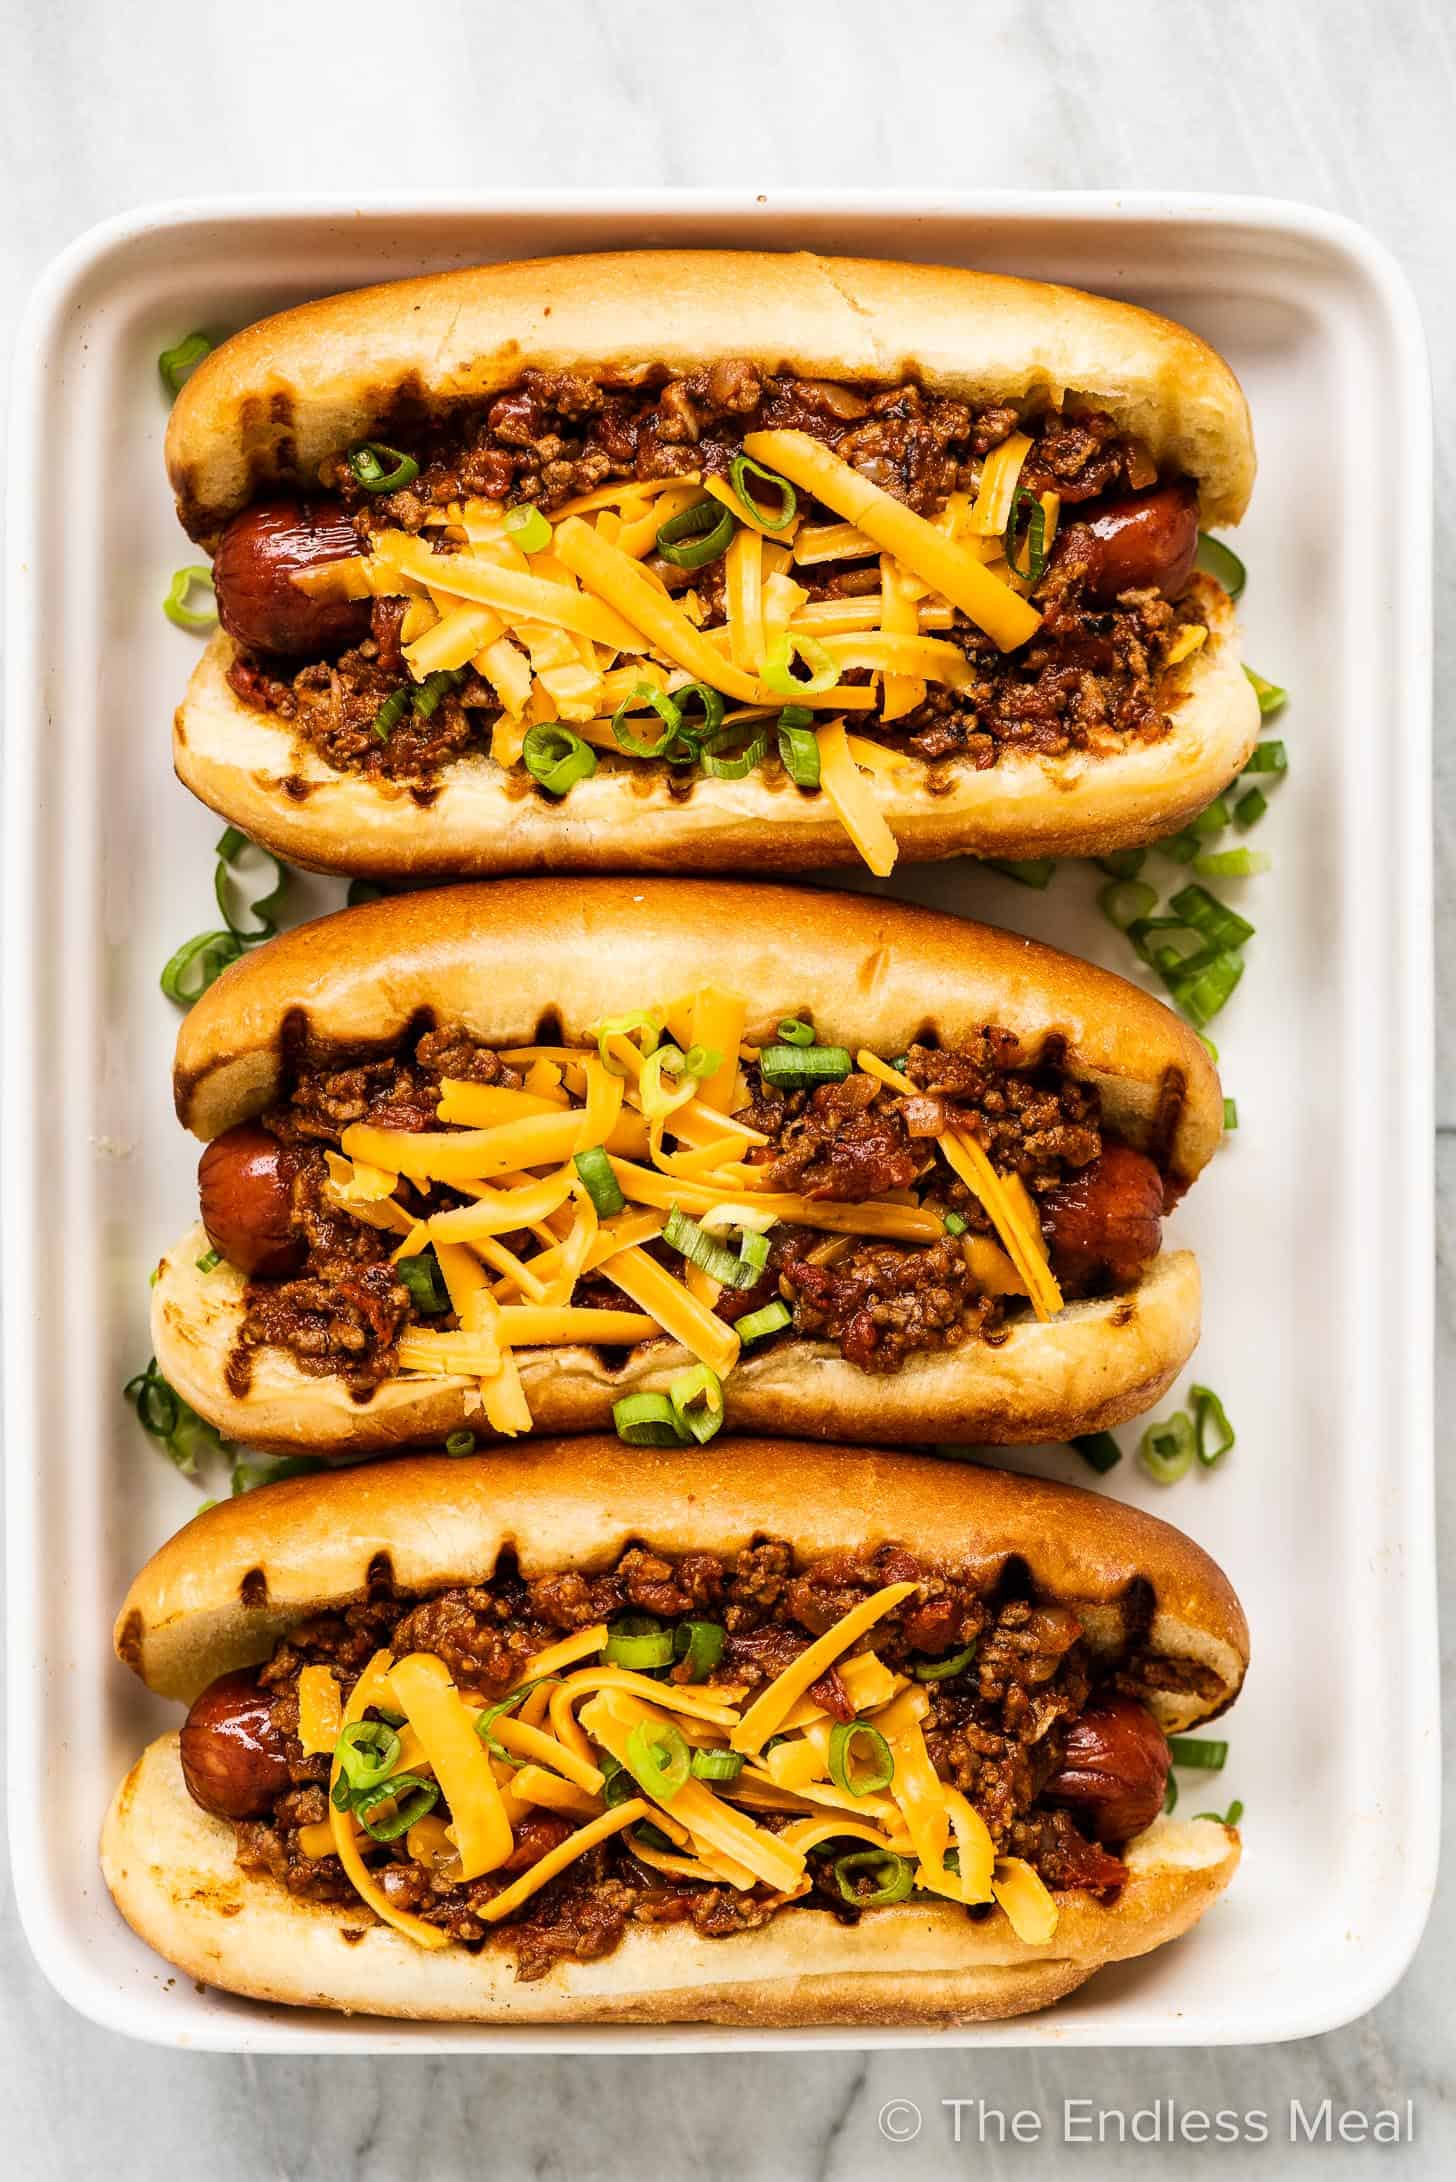 Three chili dogs on a white plate.